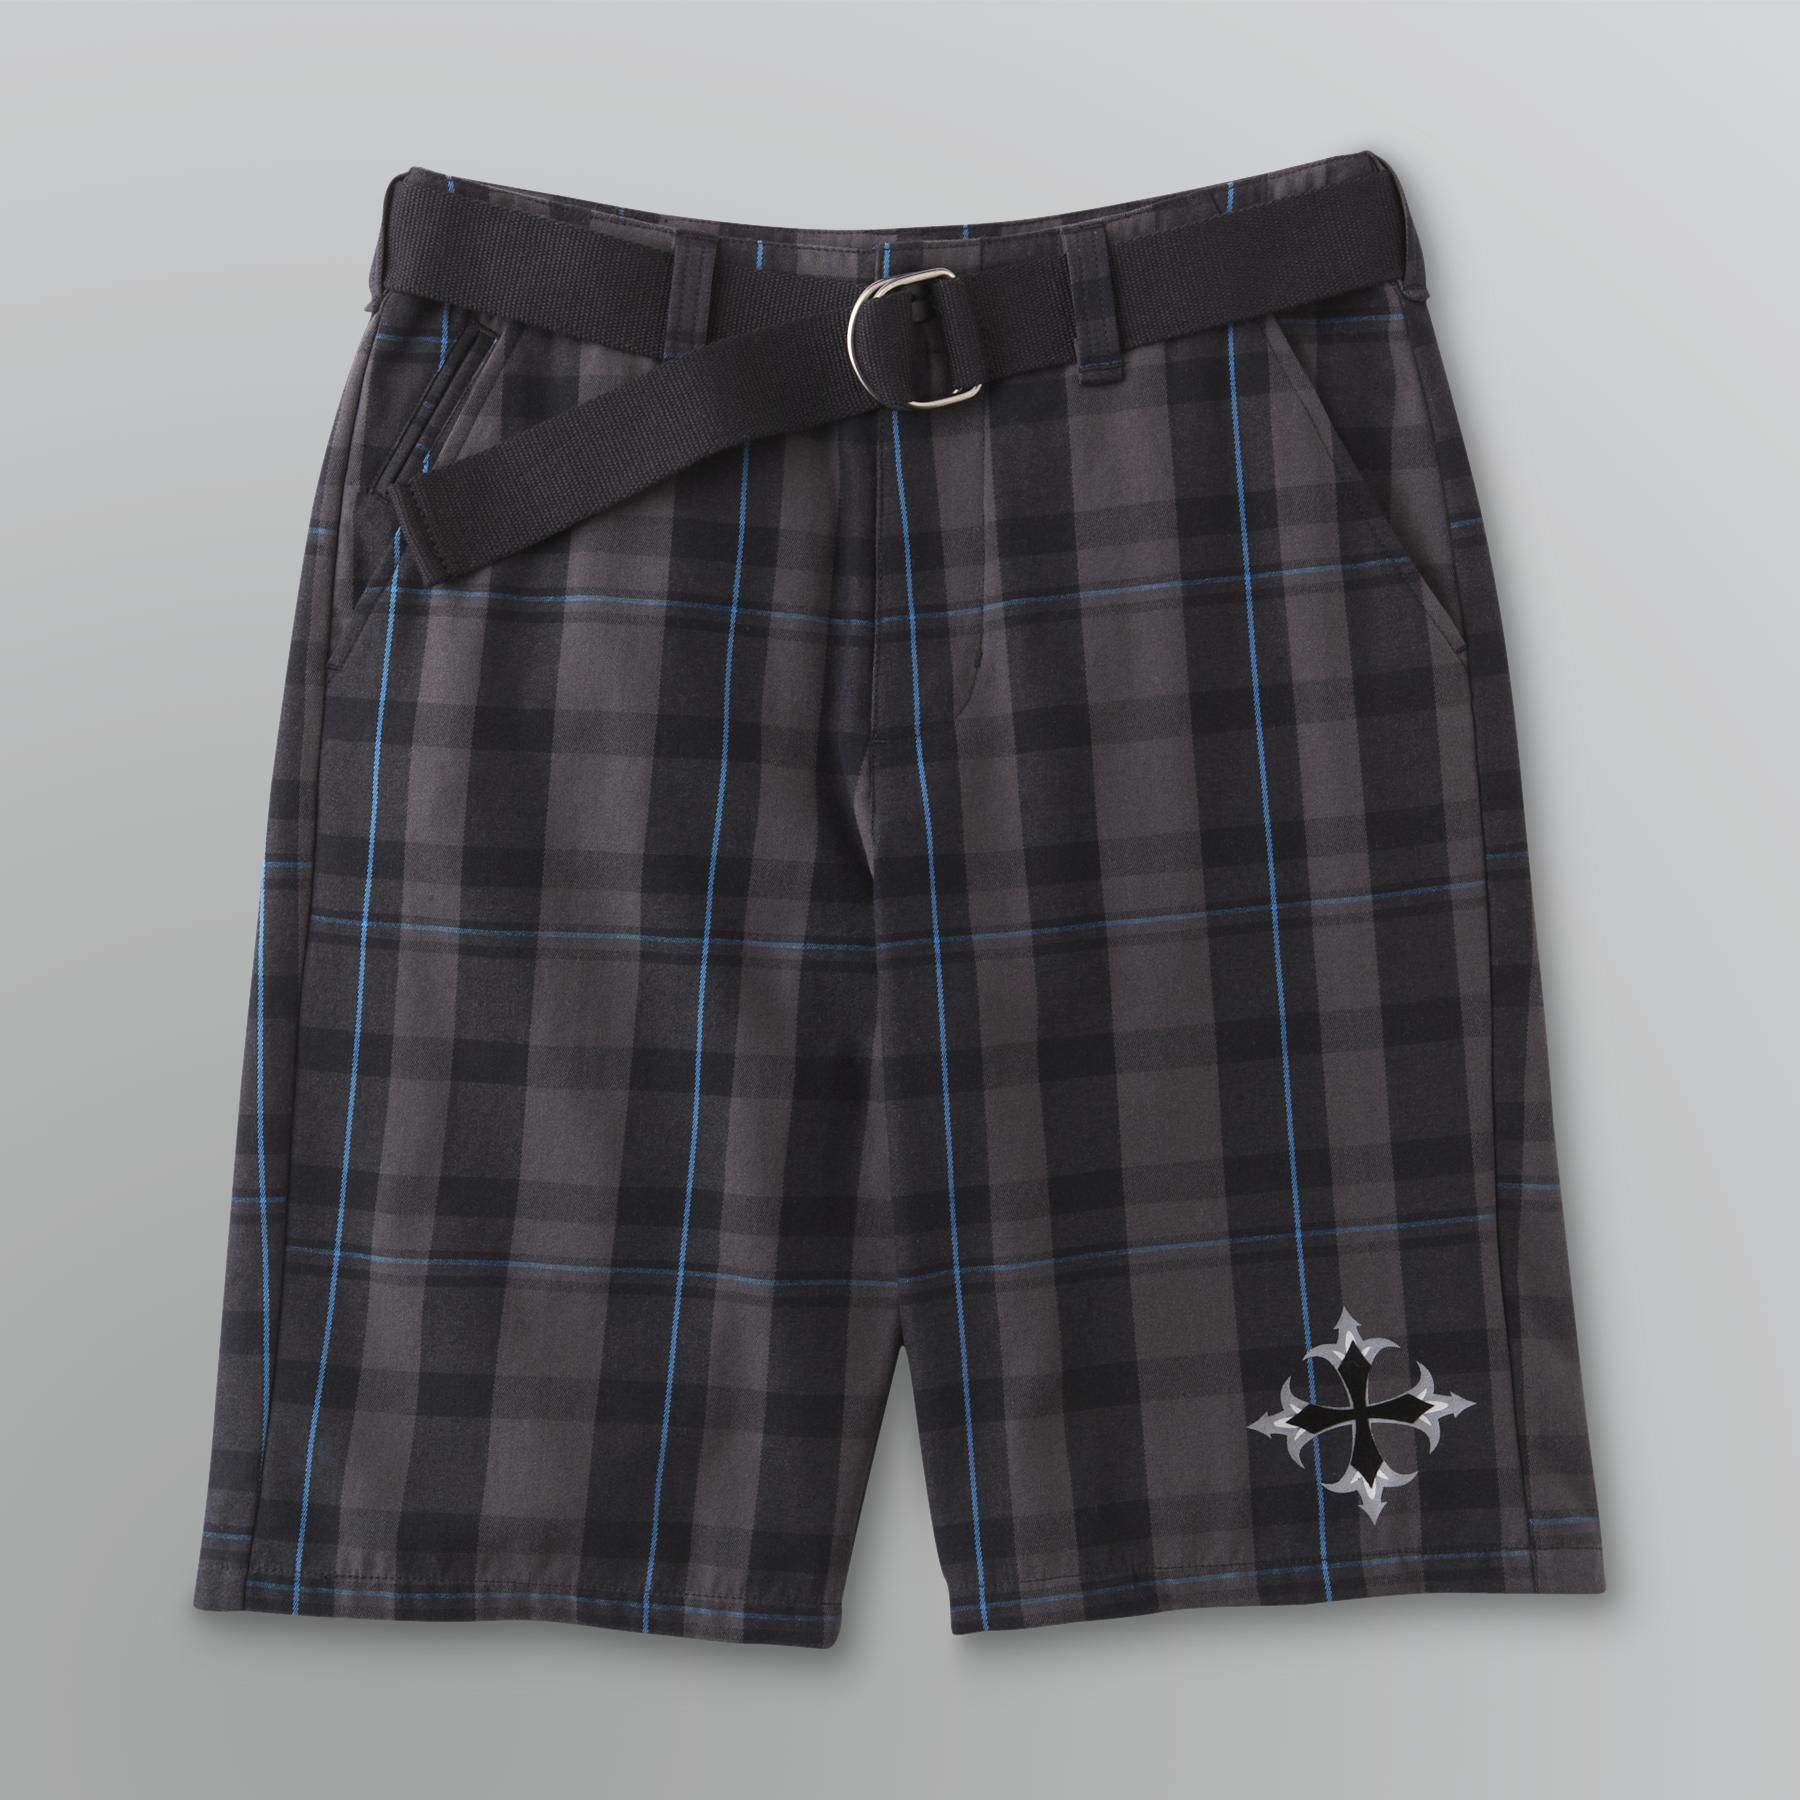 NSS Young Men's Belted Twill Plaid Short